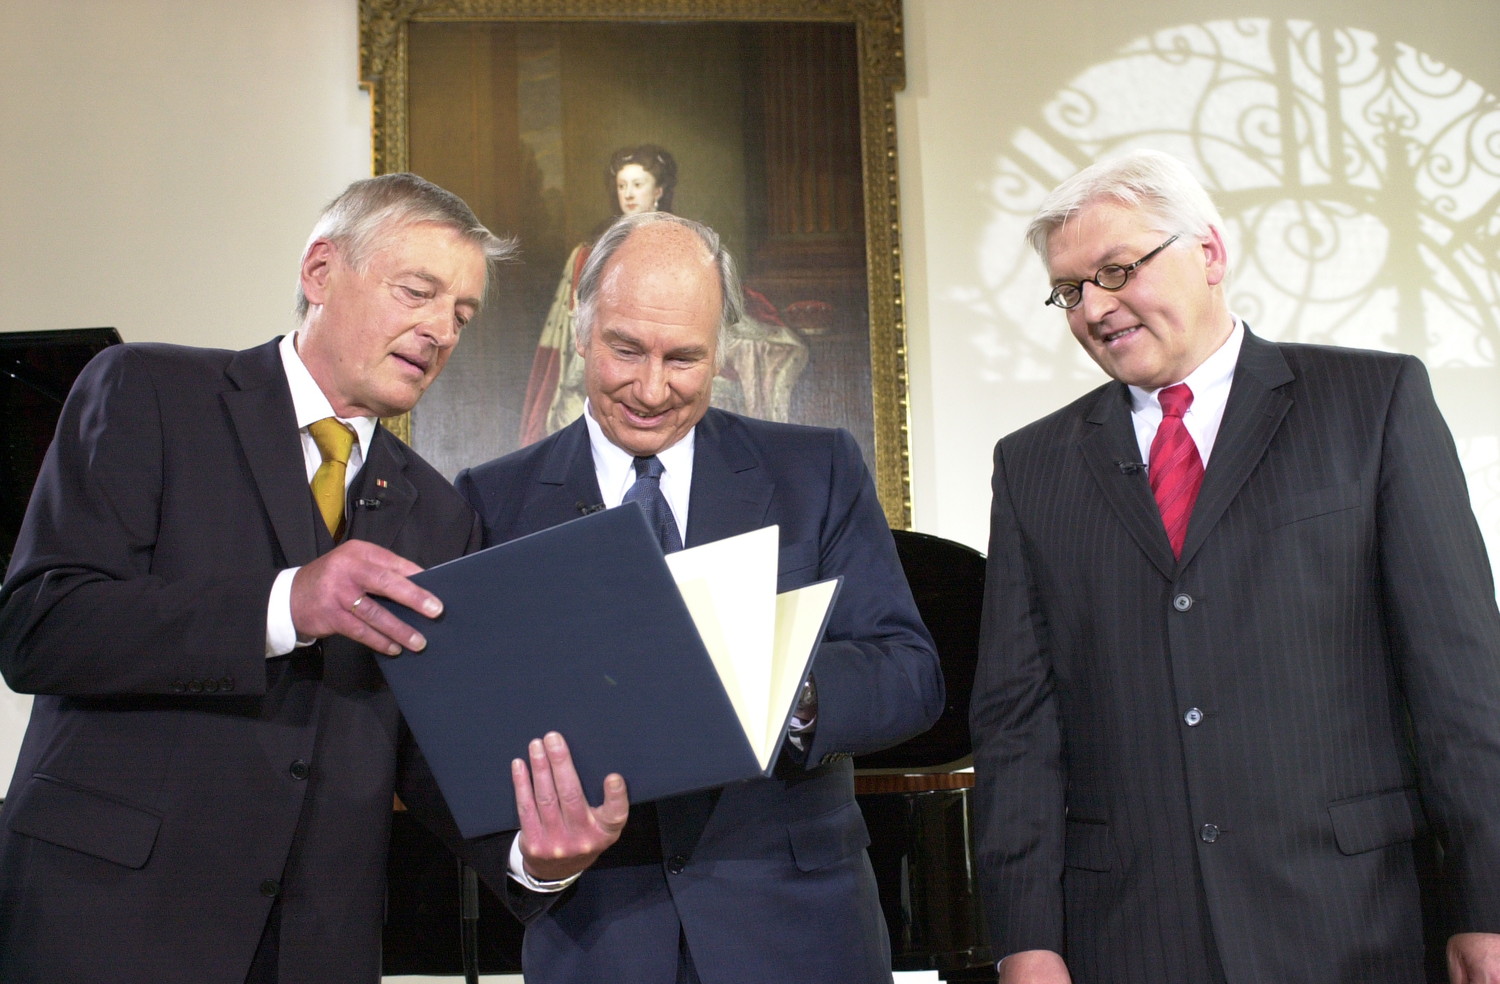 Dr. Friedemann Greiner, Director and Chairman of the Jury (left), presenting the Tolerance Award 2006 to His Highness the Aga Khan as Dr Frank-Walter Steinmeier, Germany's Minister of Foreign Affairs (right), looks on. The Tolerance Award was established by Germany’s Evangelische Akademie Tutzing in 2000 and is presented every second year to an individual whose life work is committed to building greater understanding and tolerance between different cultures and traditions. During his laudatory address, Dr Steinmeier described the Aga Khan as a “fortress for democratic progress, as someone wishing to bring about sustainable, pluralistic, civil societies…We honour an exceptional man, we honour a huge friend of humankind, we honour a courageous visionary and we honour a person building bridges between societies,” Photo: AKDN/Zahur Ramji.